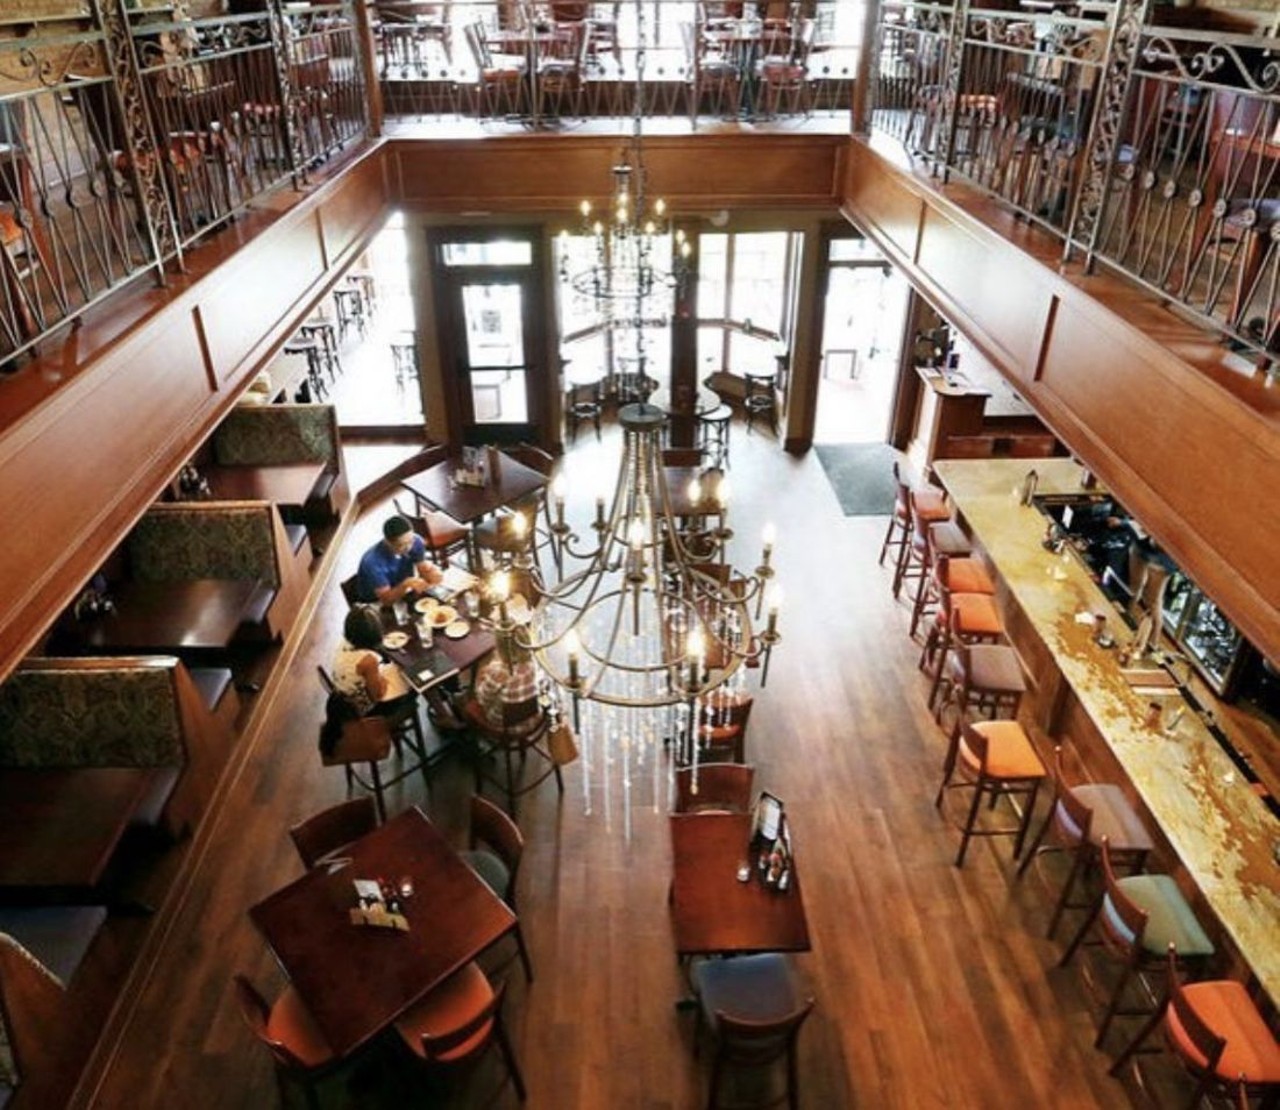  Bourbon Street Barrel Room
2393 Professor Ave., Cleveland
With the perfect mix of eccentric and classy decor, this Tremont spot has the right ambience for the type of place it is - a slice of New Orleans in Cleveland. And the bourbon list is extensive, naturally.
Photo via @BSBRCle/Instagram